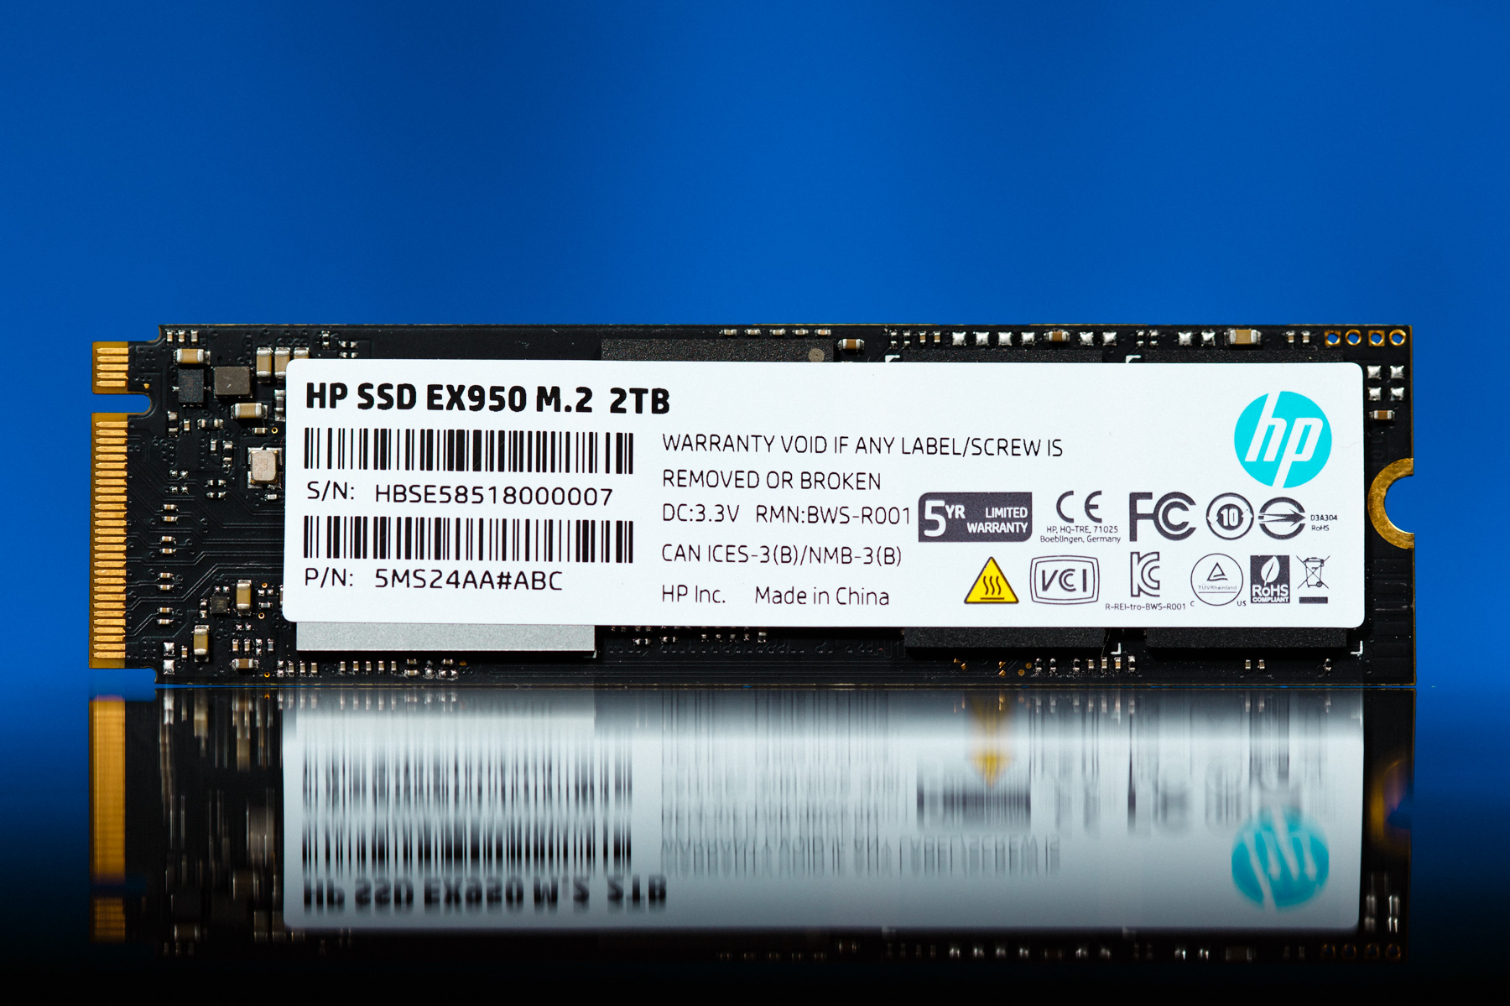 Conclusion Hp Ssd Ex950 Nvme M 2 Ssd Review Geared For Gaming Tom S Hardware Tom S Hardware